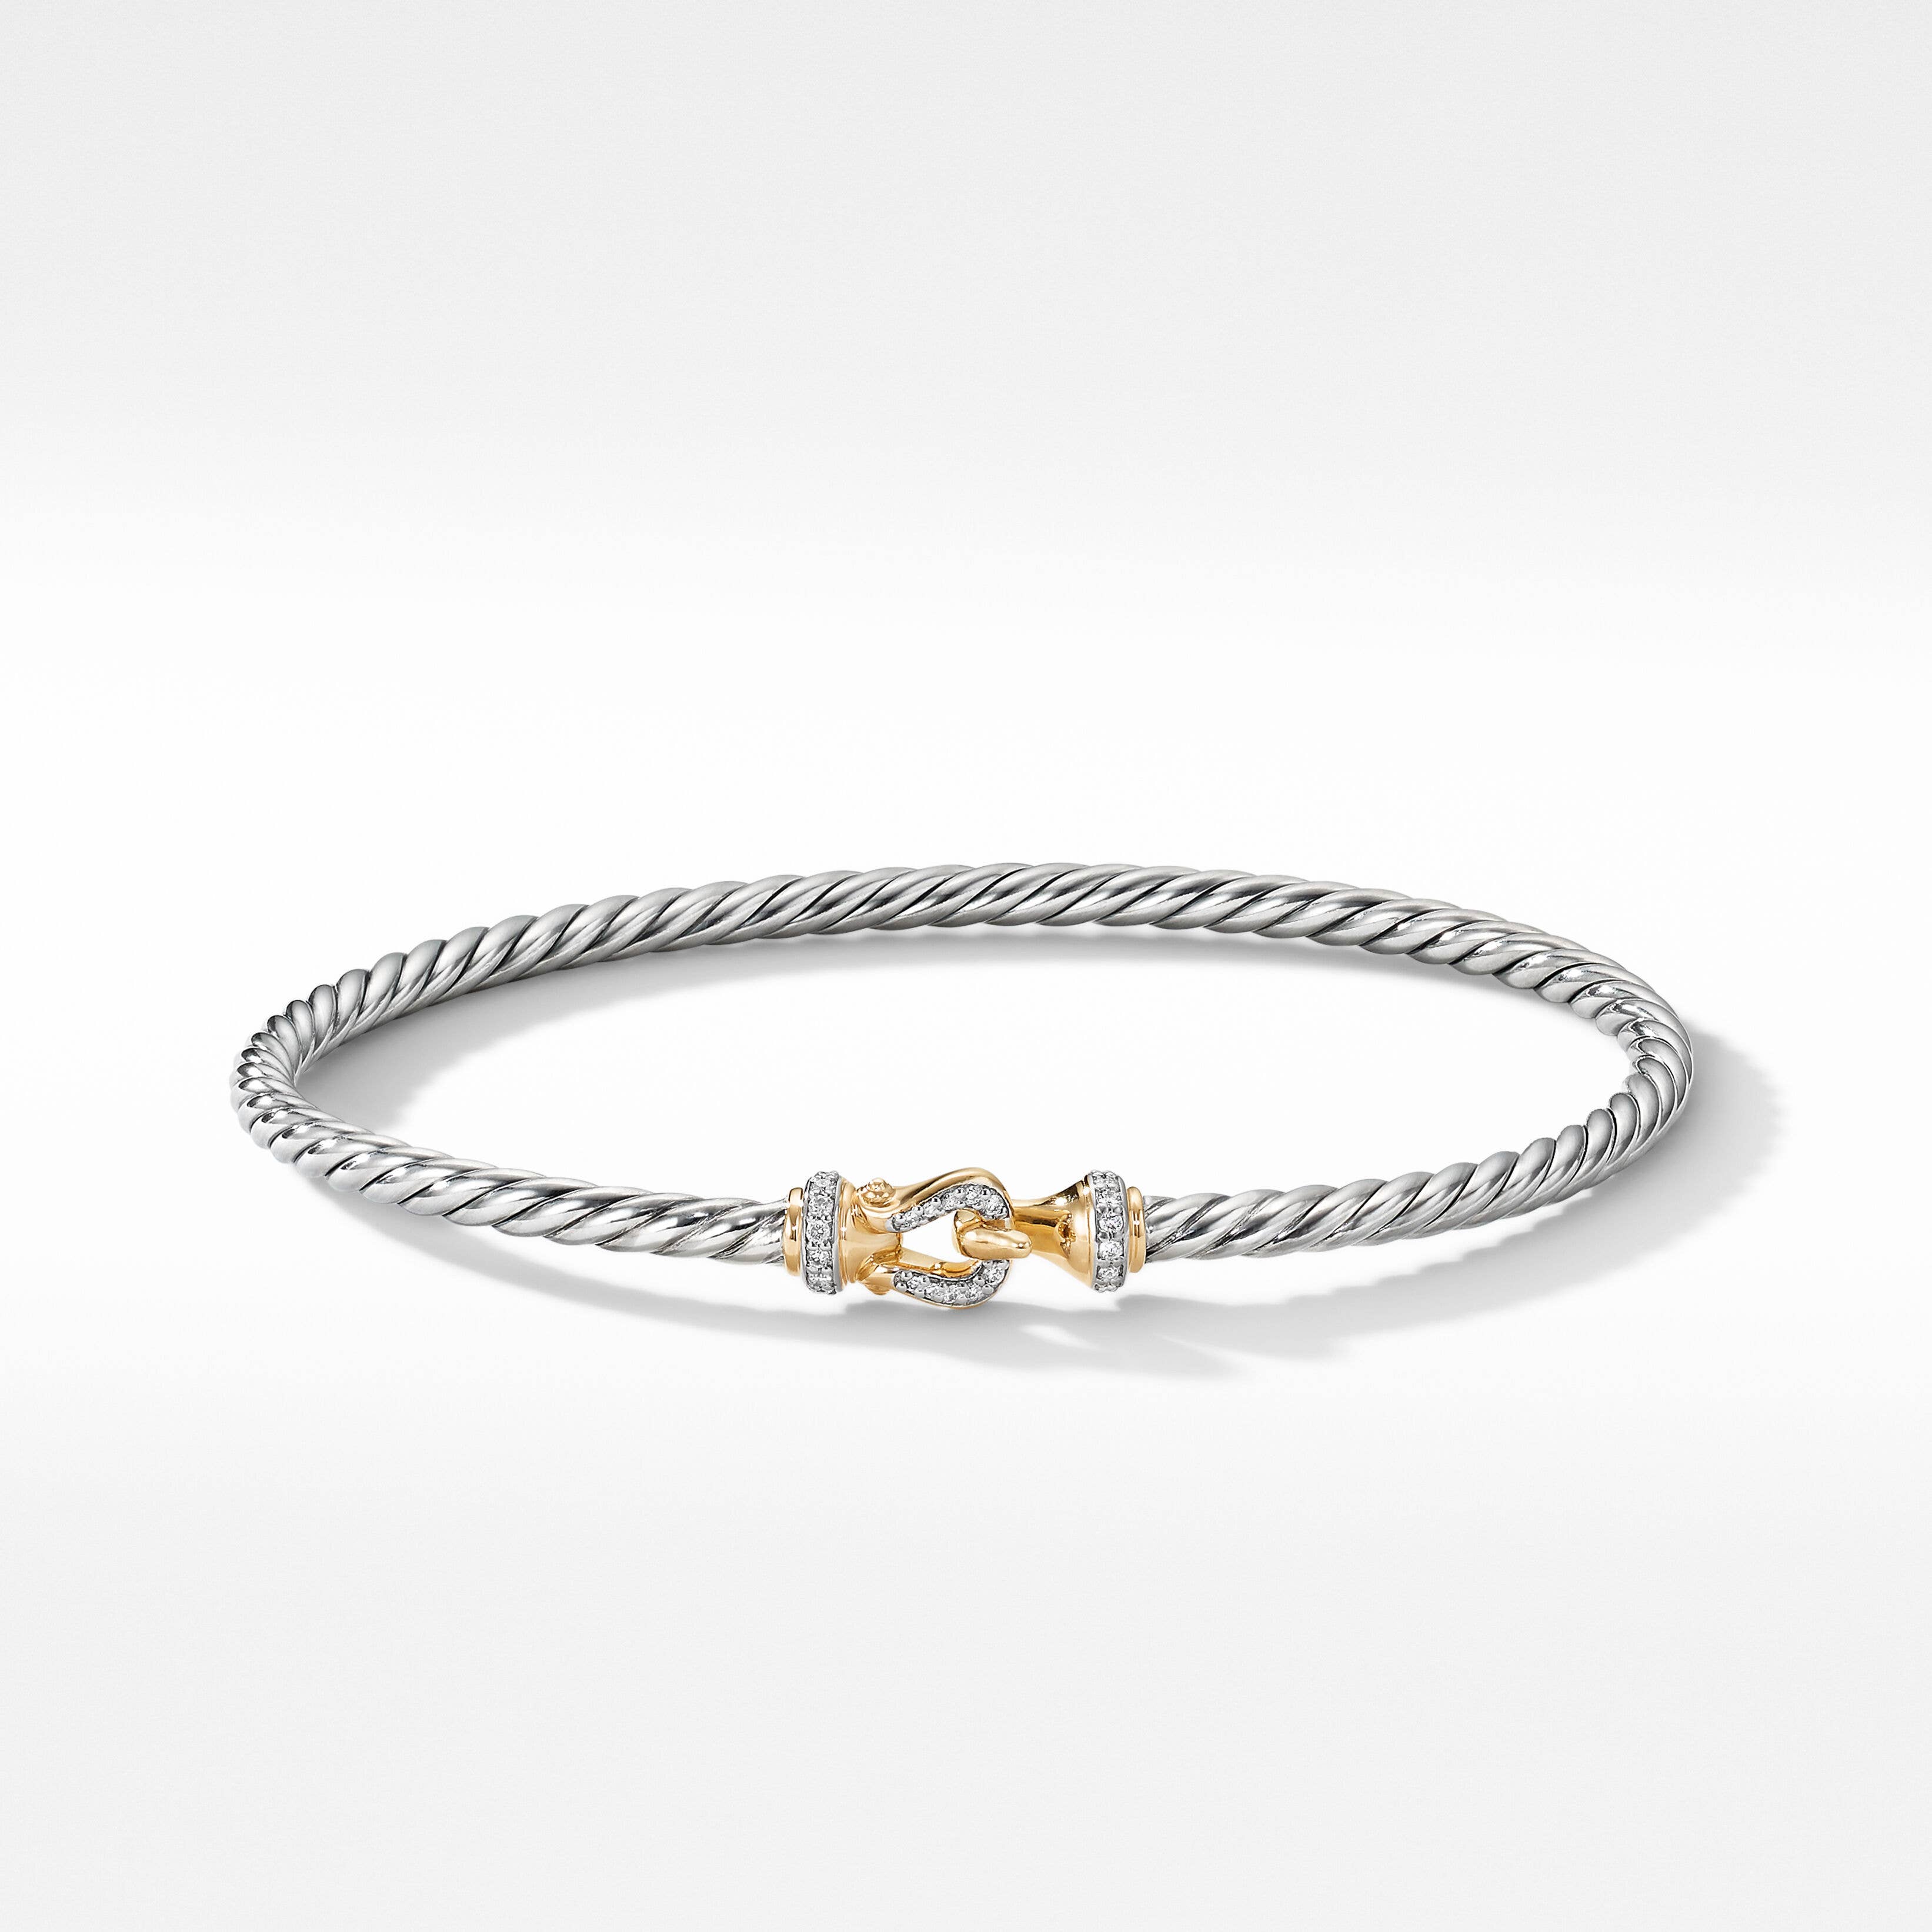 Buckle Bracelet in Sterling Silver with 18K Yellow Gold and Pavé Diamonds